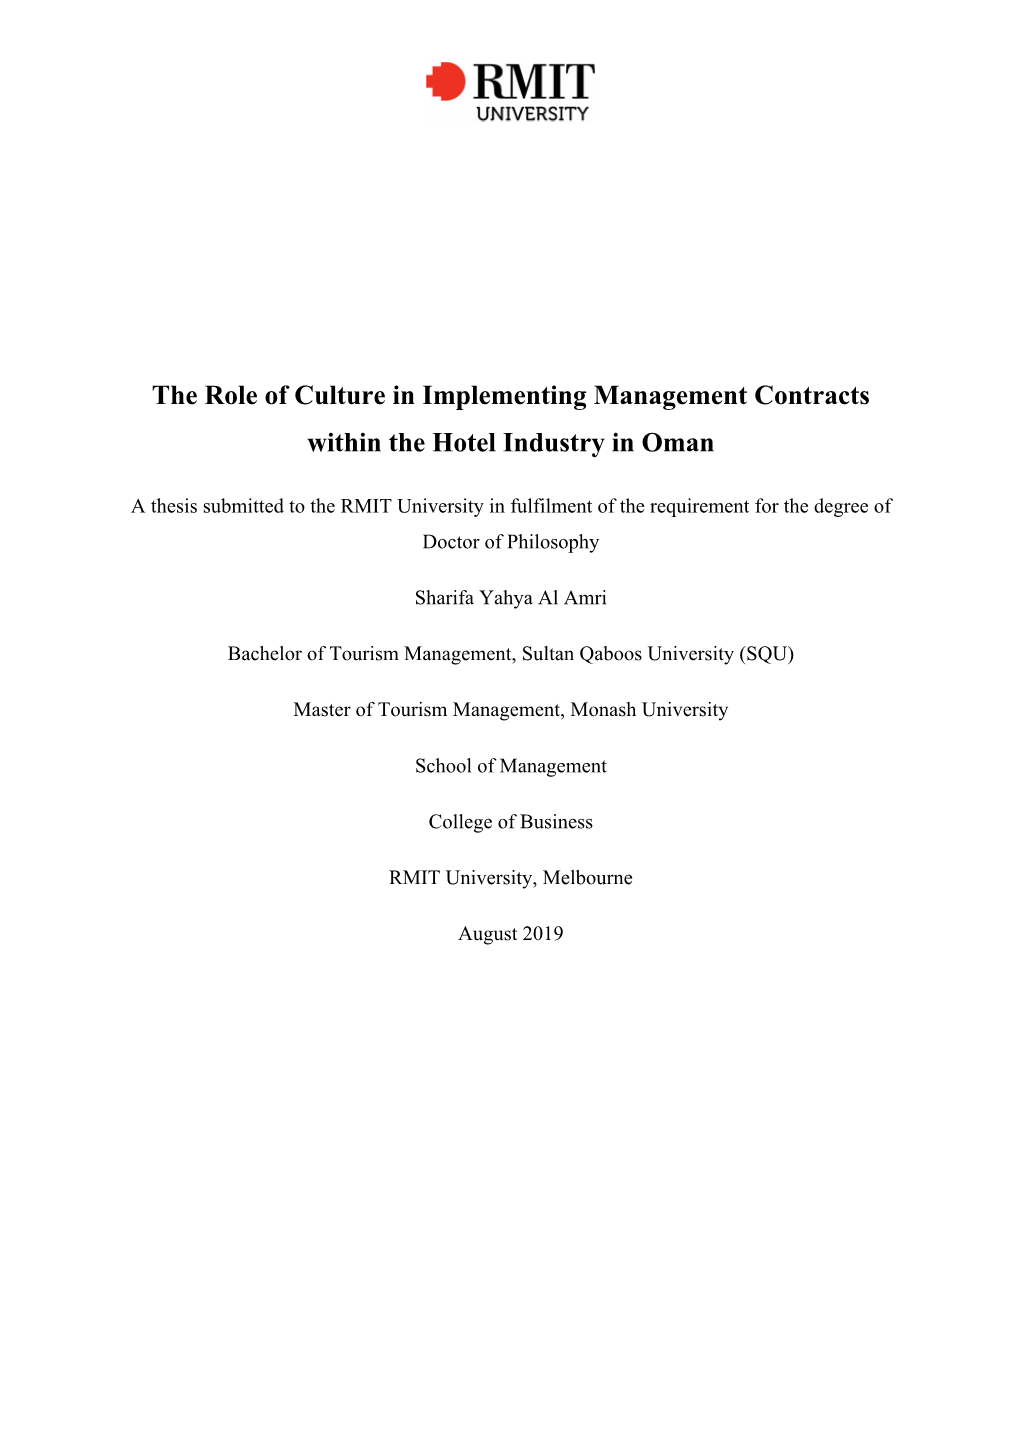 The Role of Culture in Implementing Management Contracts Within the Hotel Industry in Oman